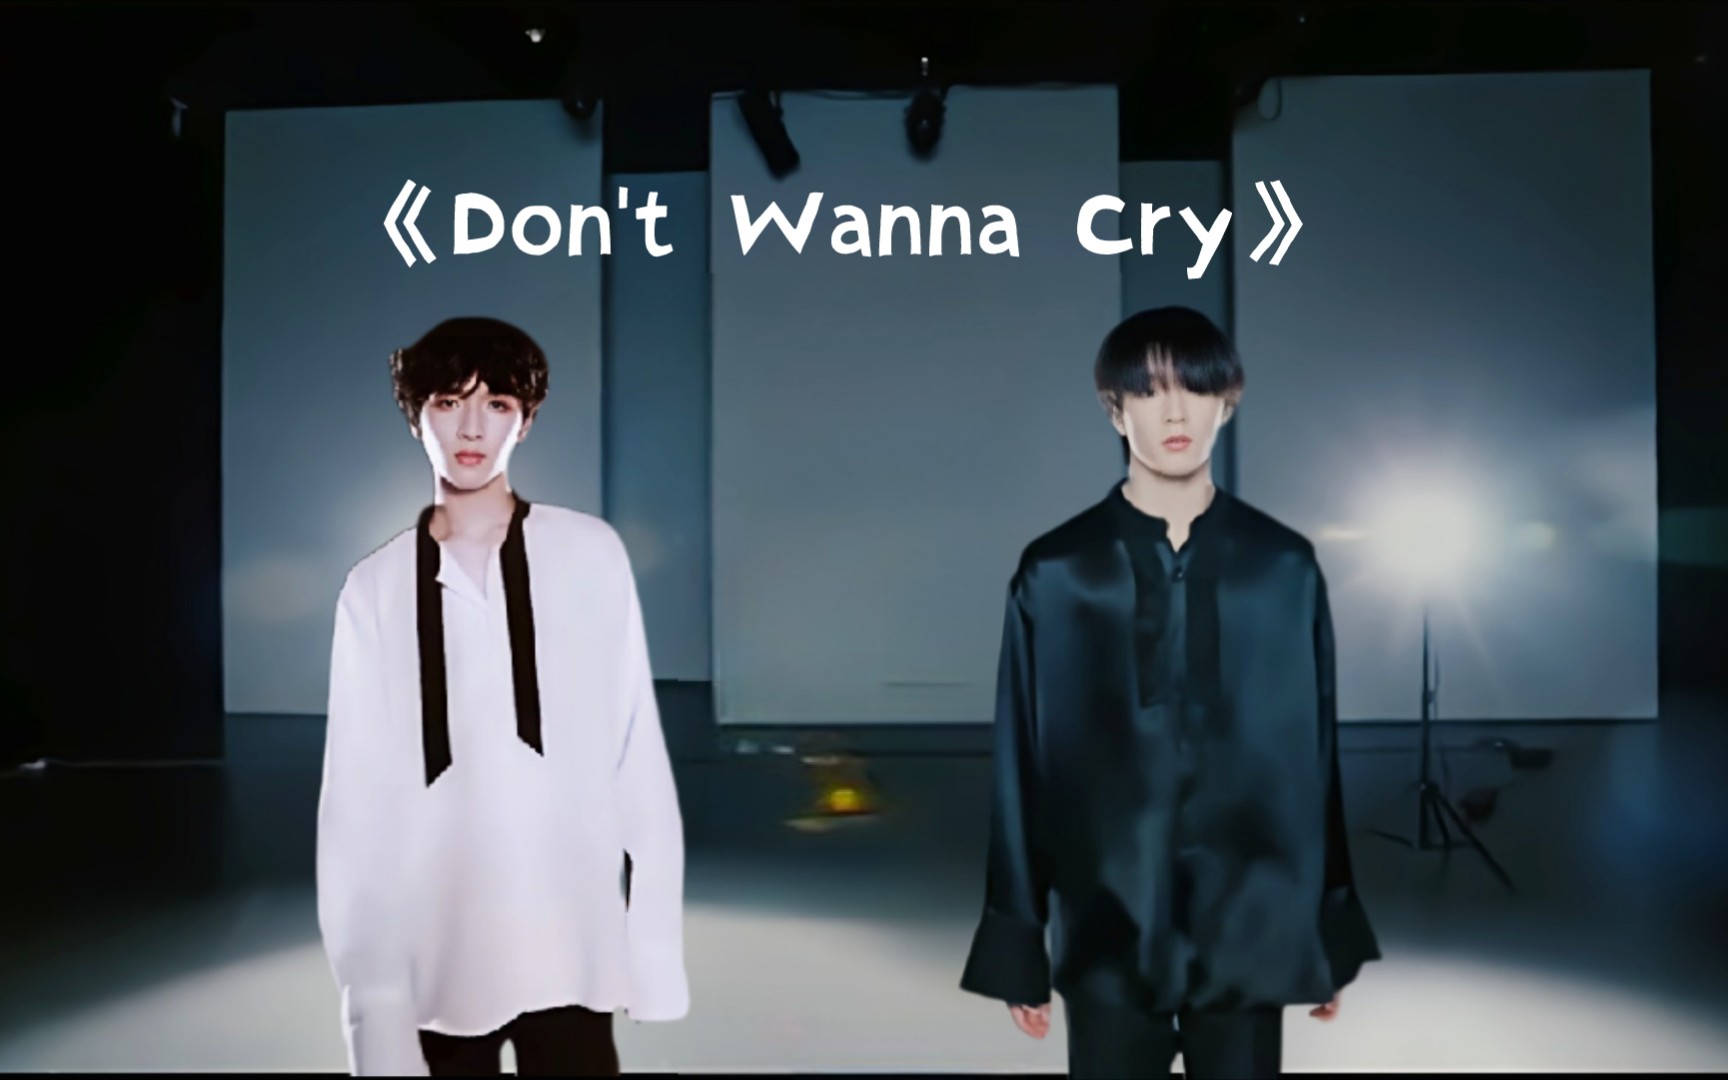 【Don't Wanna Cry】刘耀文/严浩翔